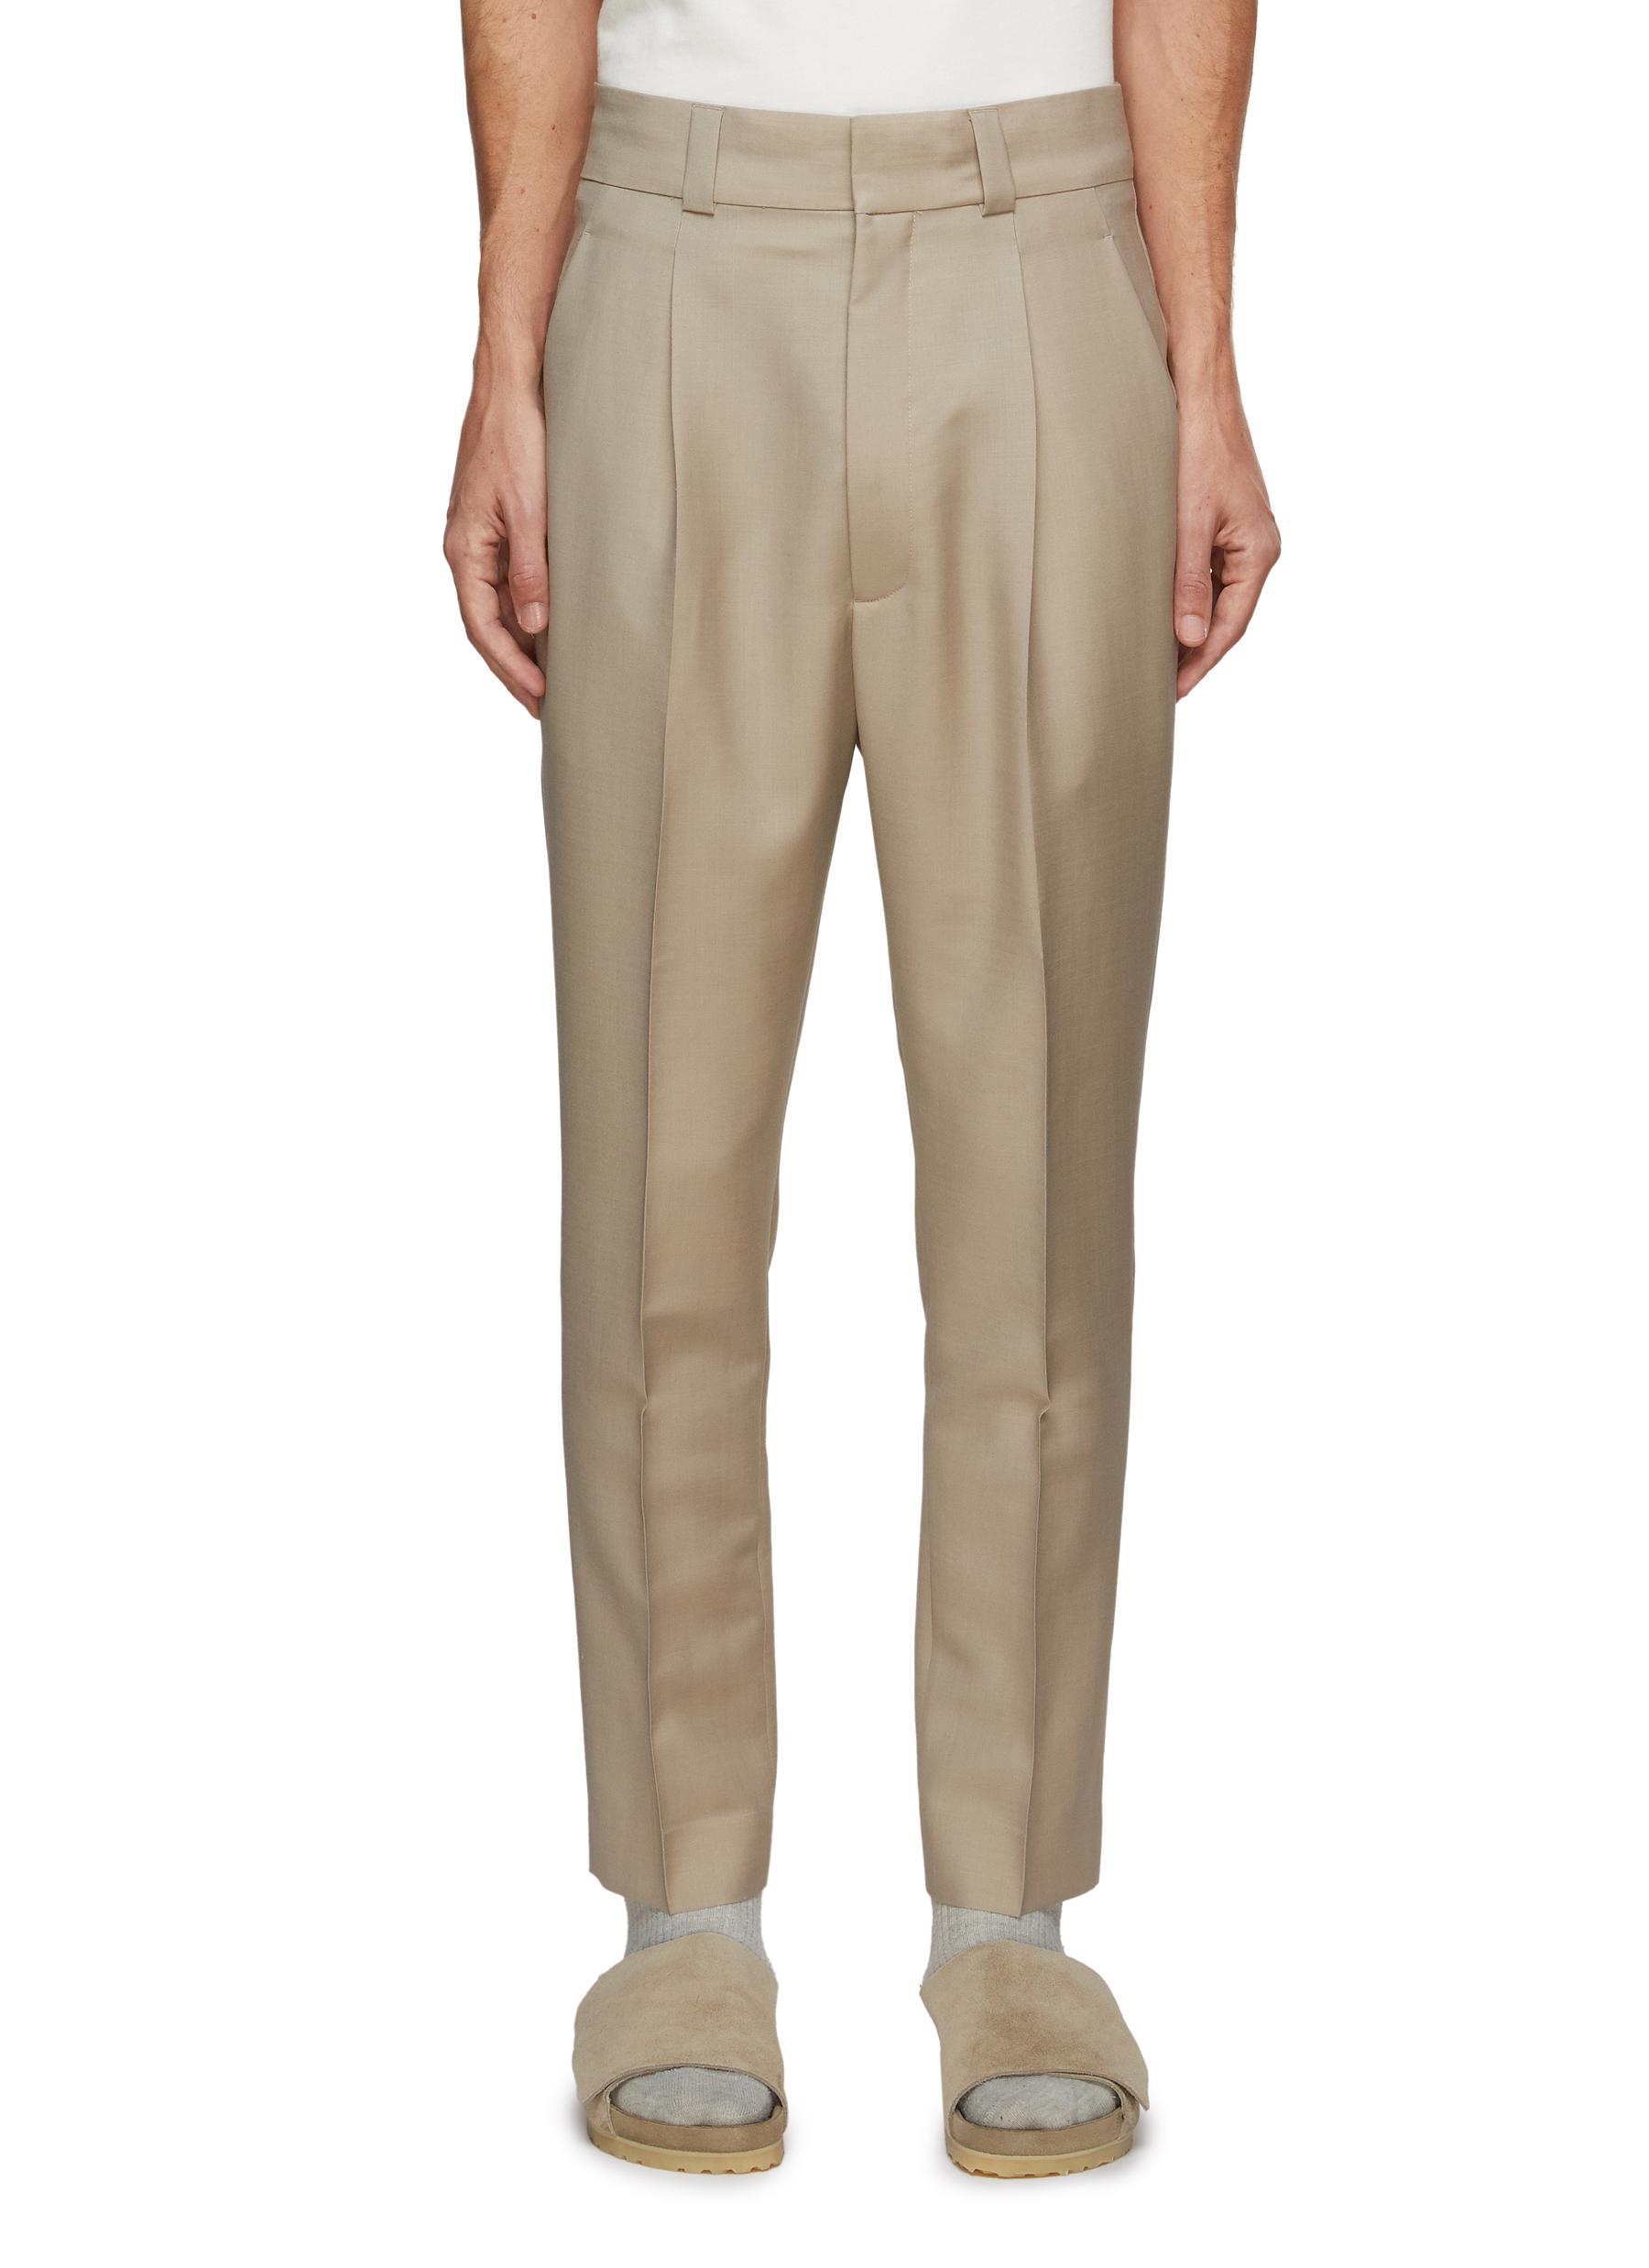 FEAR OF GOD ‘ETERNAL' PLEATED MOHAIR BLEND SUITING PANTS